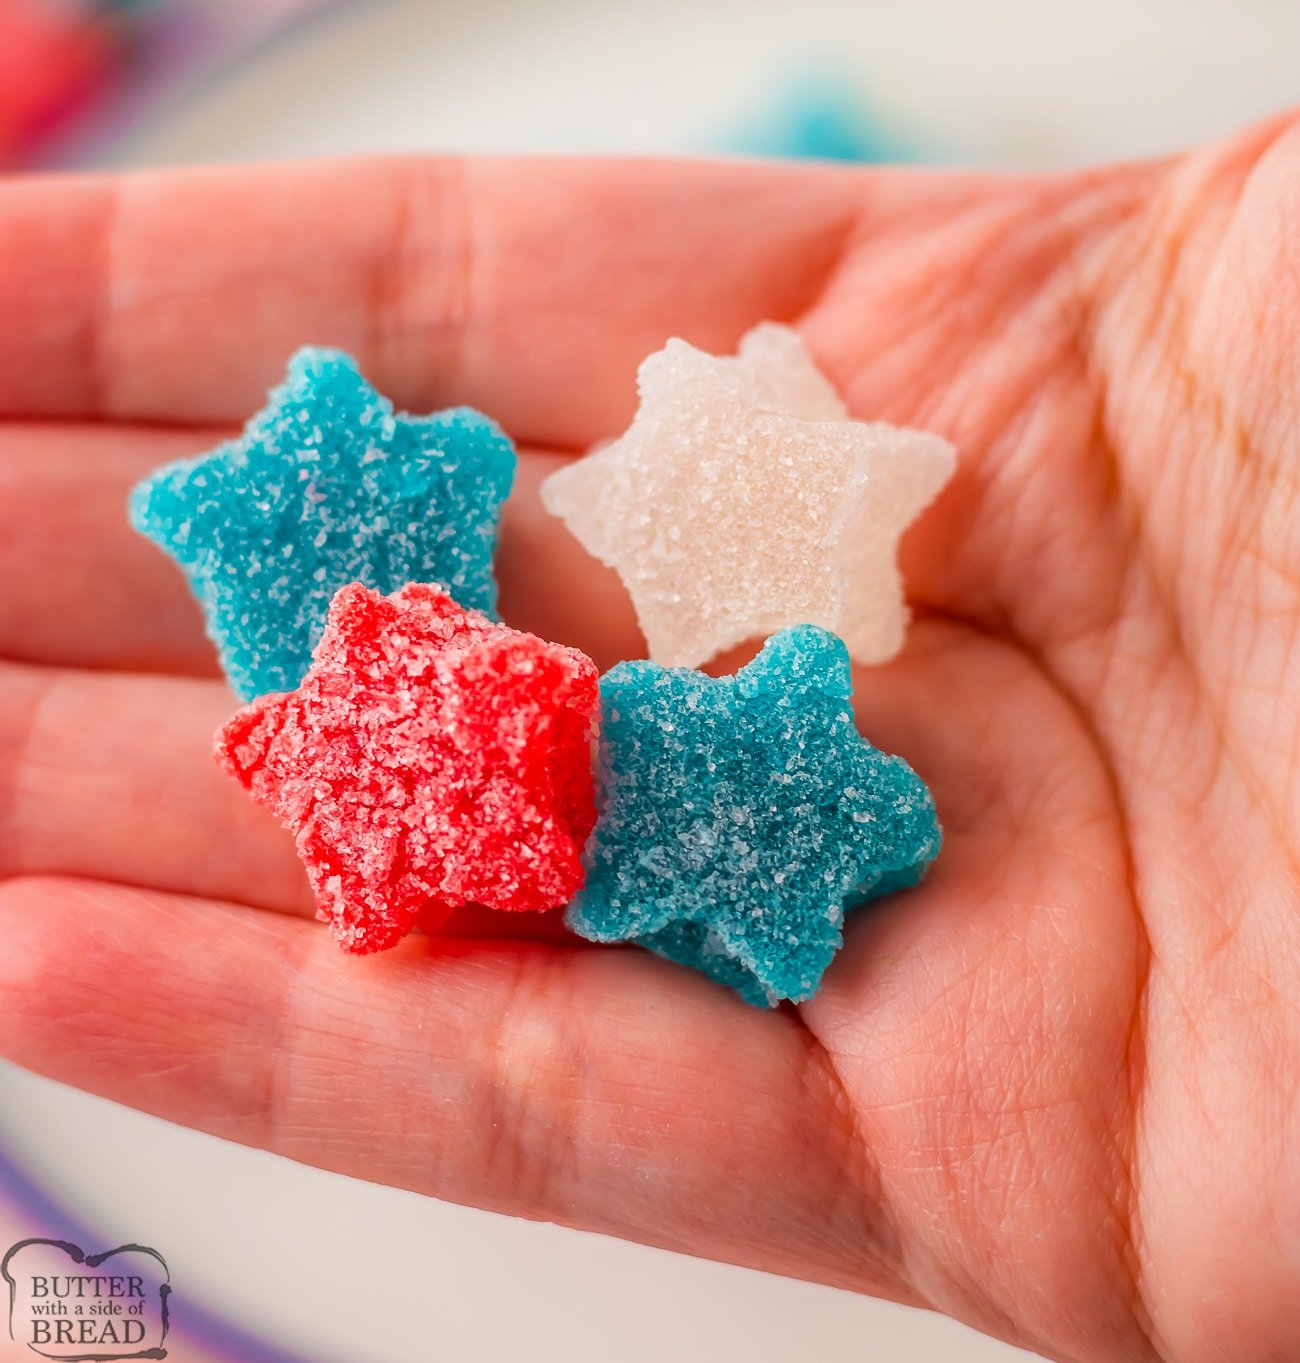 holding homemade red, white and blue star gumdrops in my hand